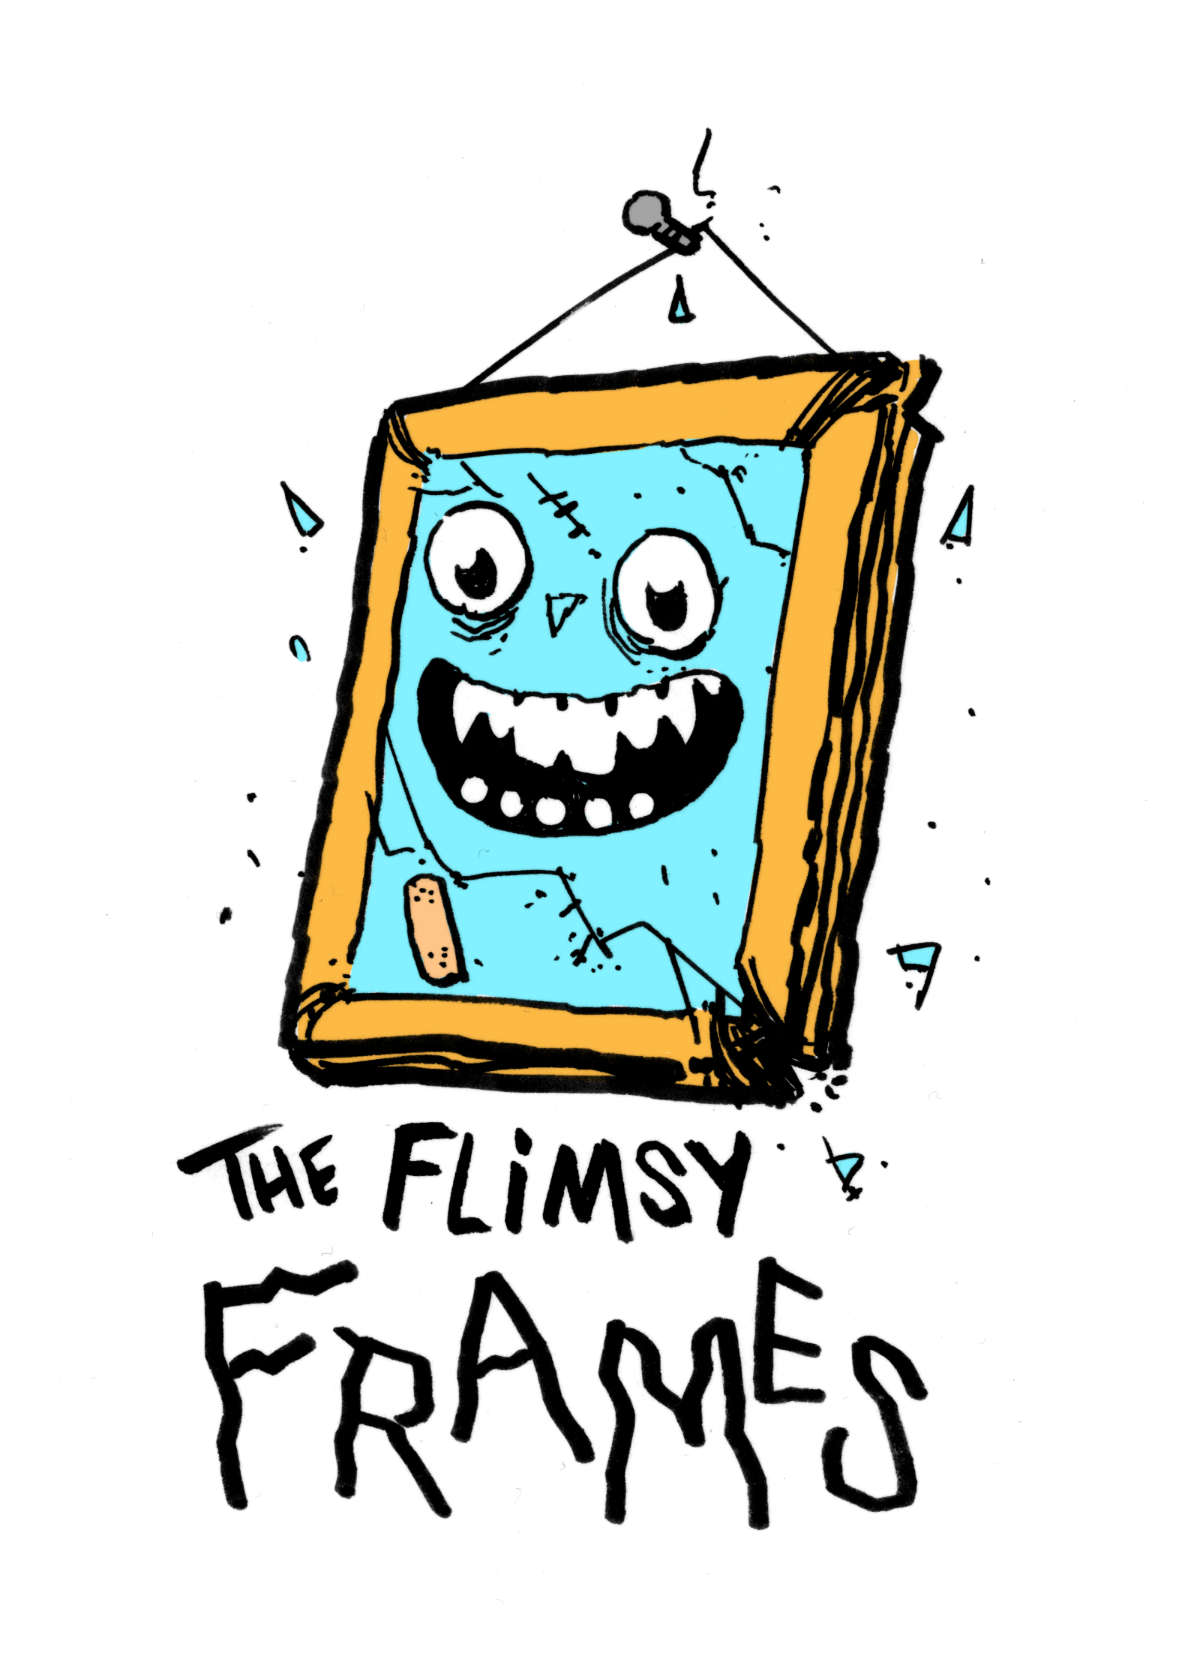 illustration of a flimsy picture frame